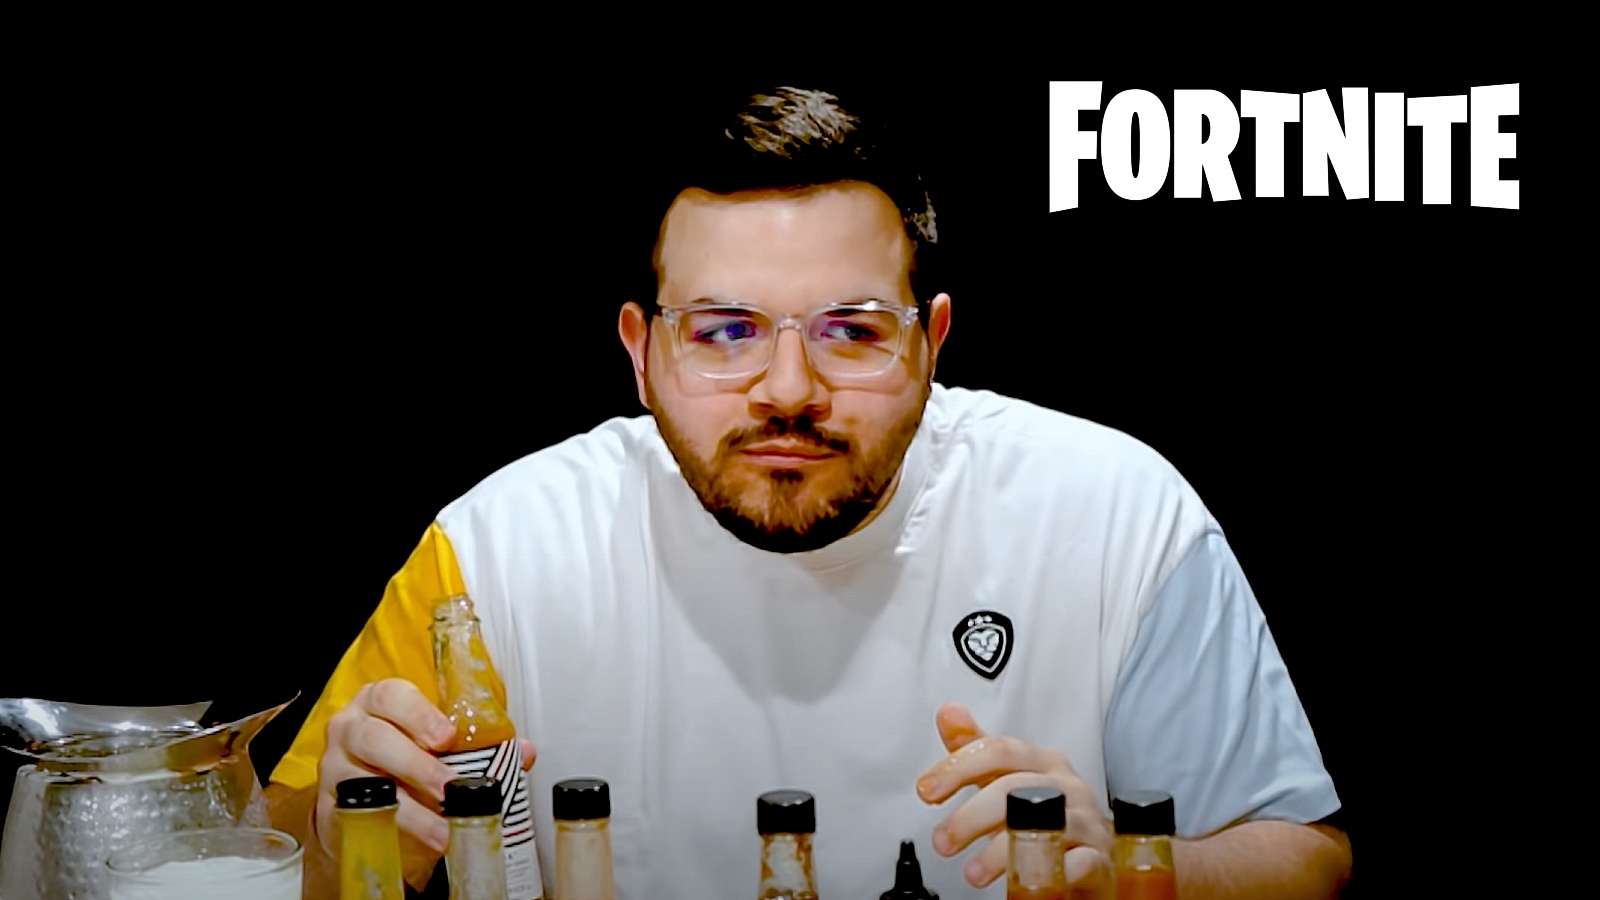 CouRageJD eating hot wings with Fortnite logo